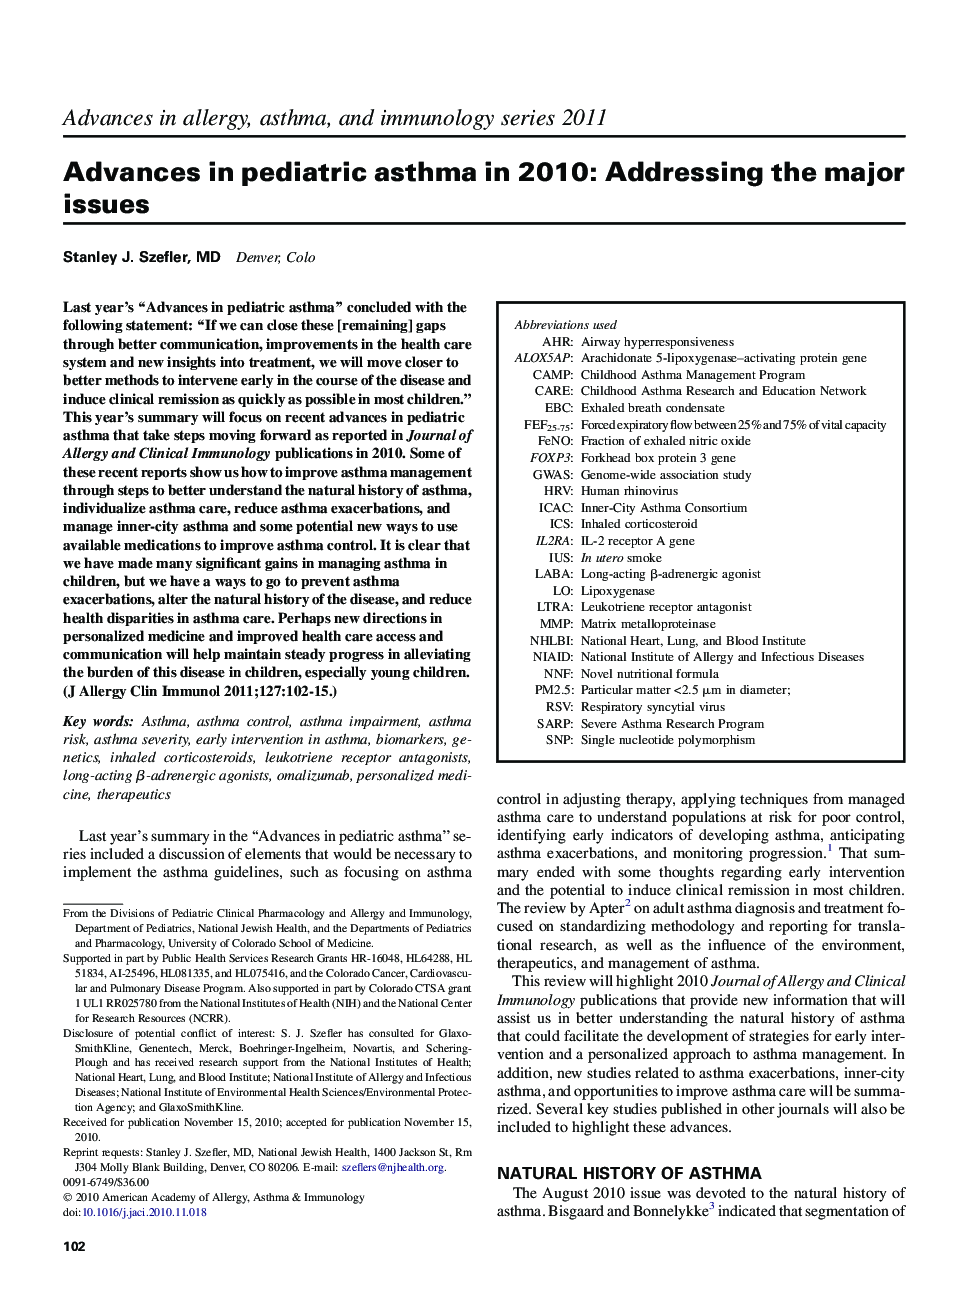 Advances in pediatric asthma in 2010: Addressing the major issues 